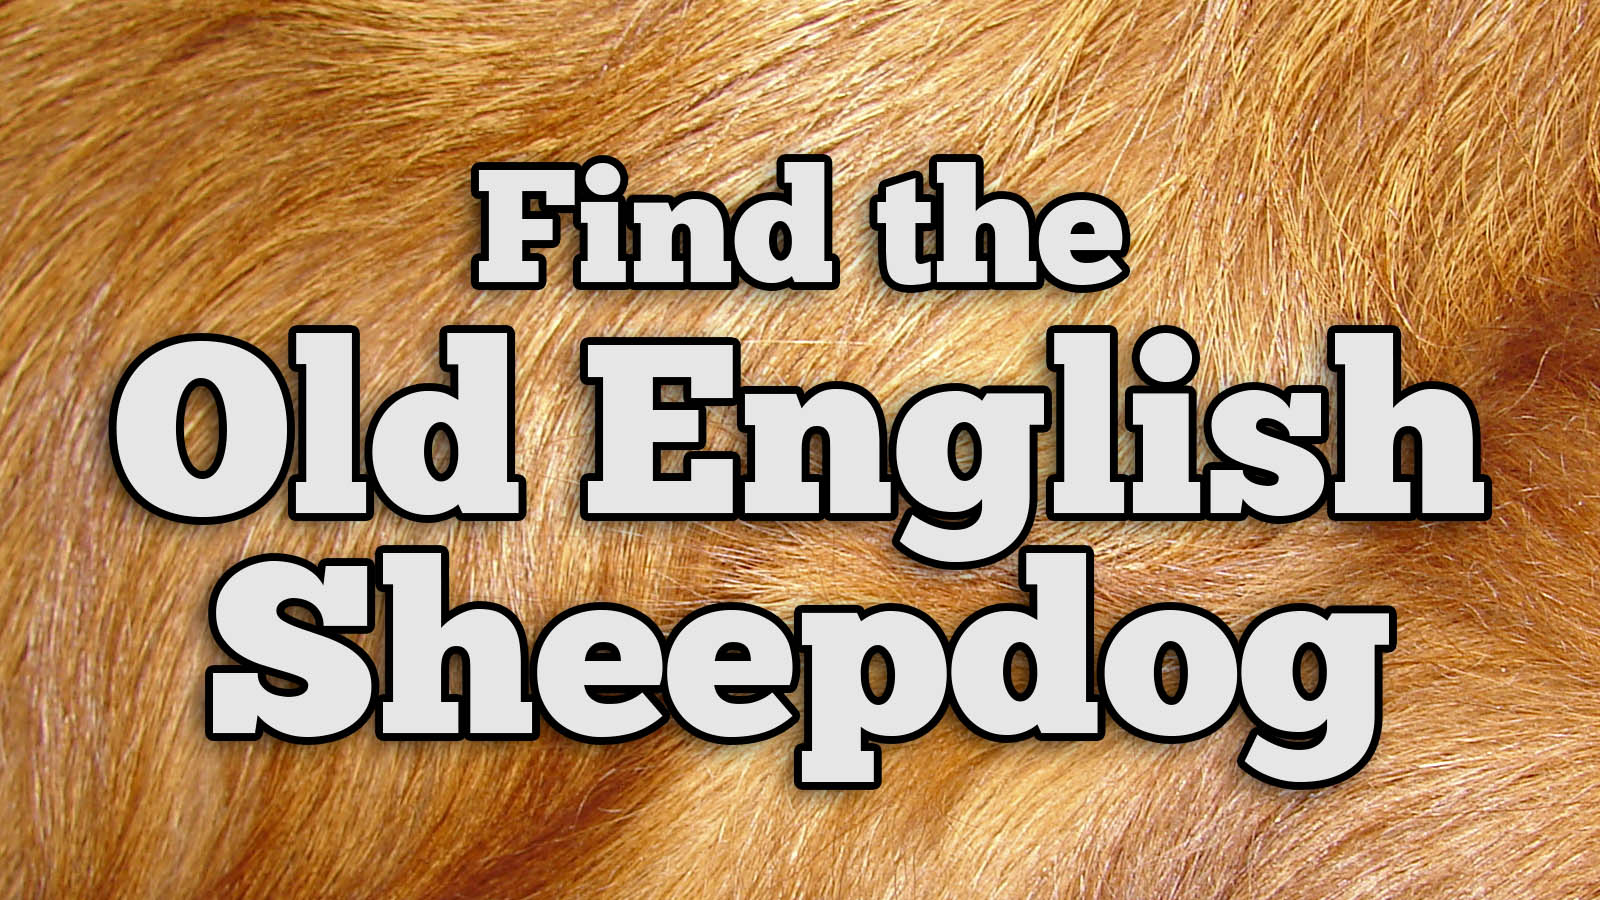 We Bet You Can’t Identify More Than 20/27 of These Dog Breeds Text Old English Sheepdog